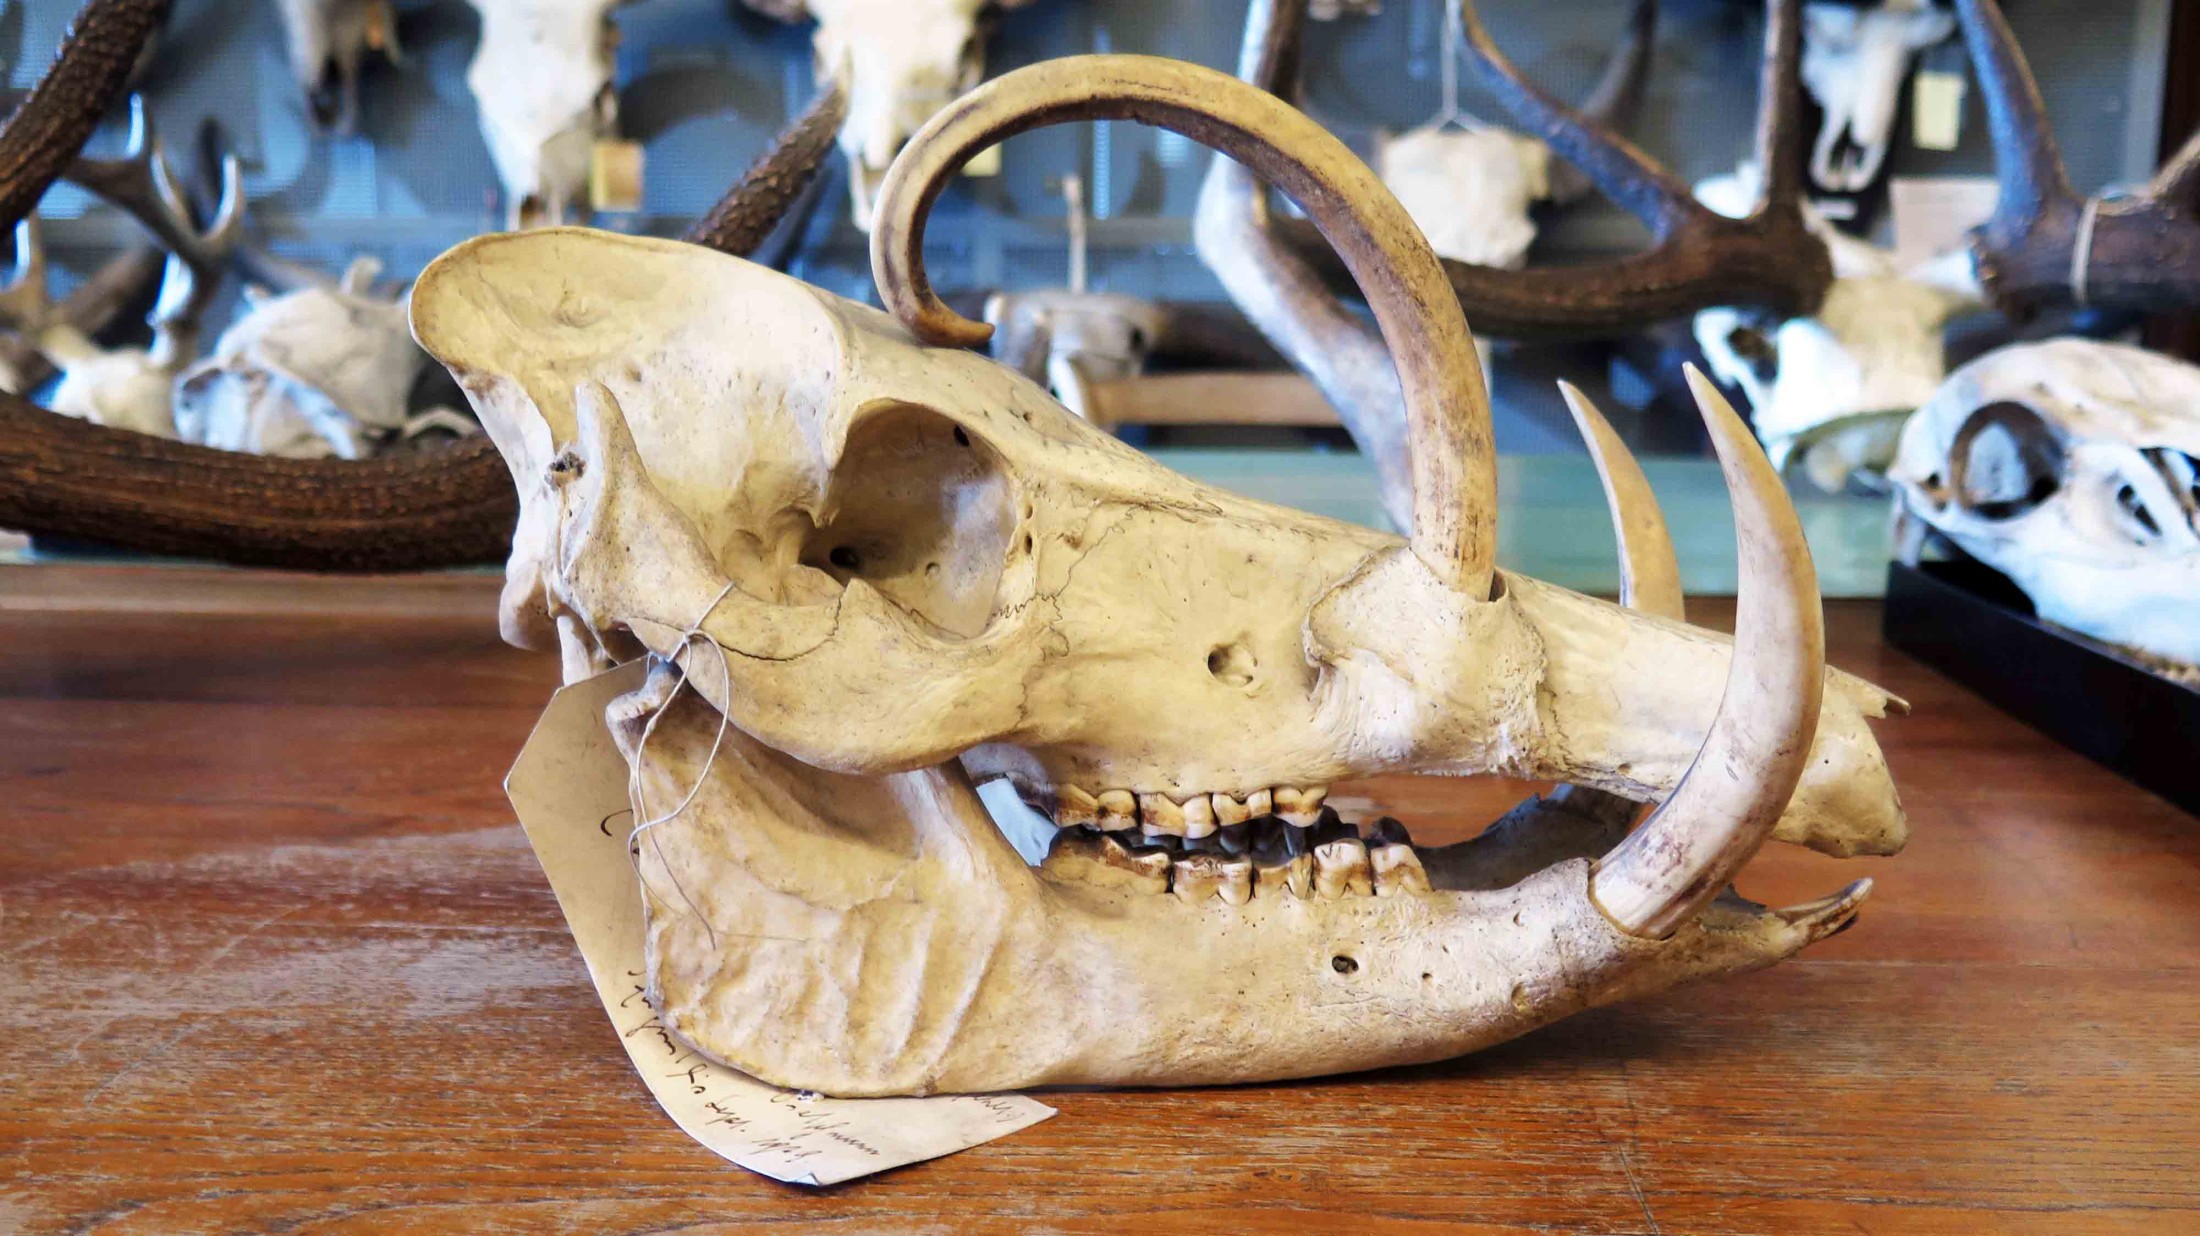 : Babirusa: In males of this pig species found mainly on the Indonesian island of Sulawesi the upper canines grow upward and then curve back towards the eyes. (c) NHM Vienna, Alice Schumacher